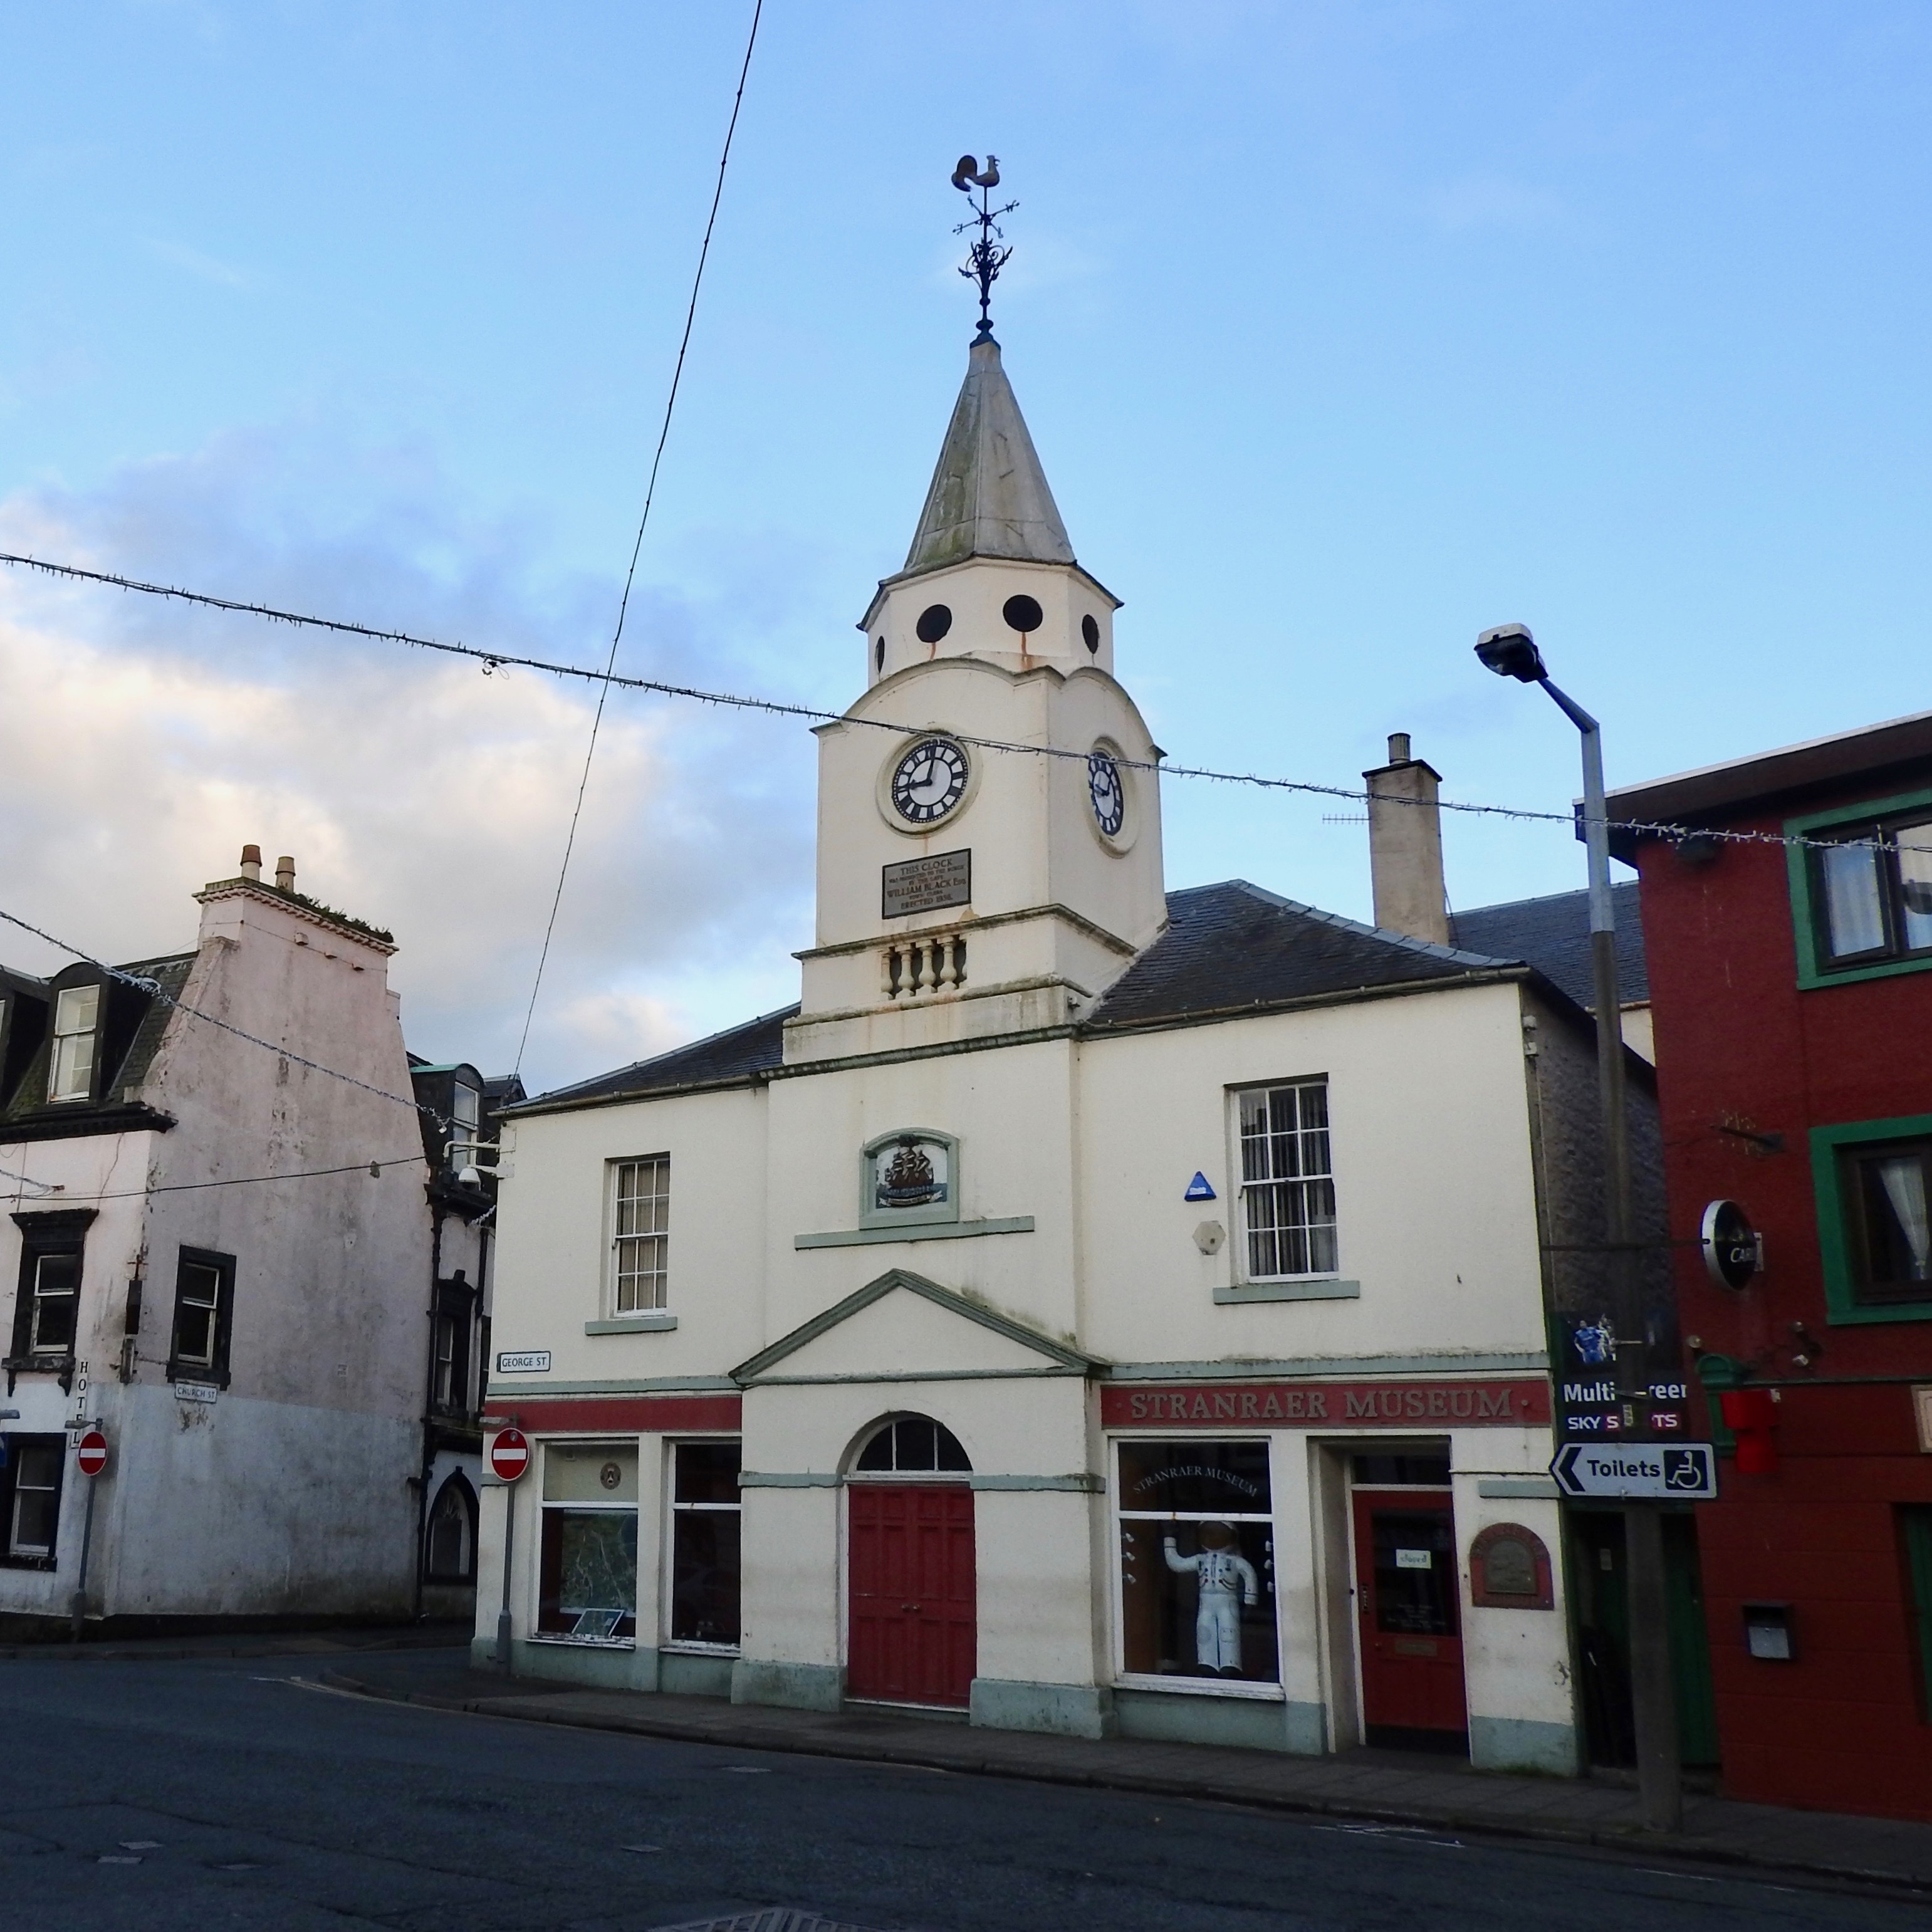 Stranraer's historic Old Town Hall, built in 1776, is the home of Stranraer Museum.

#OnTheRoad